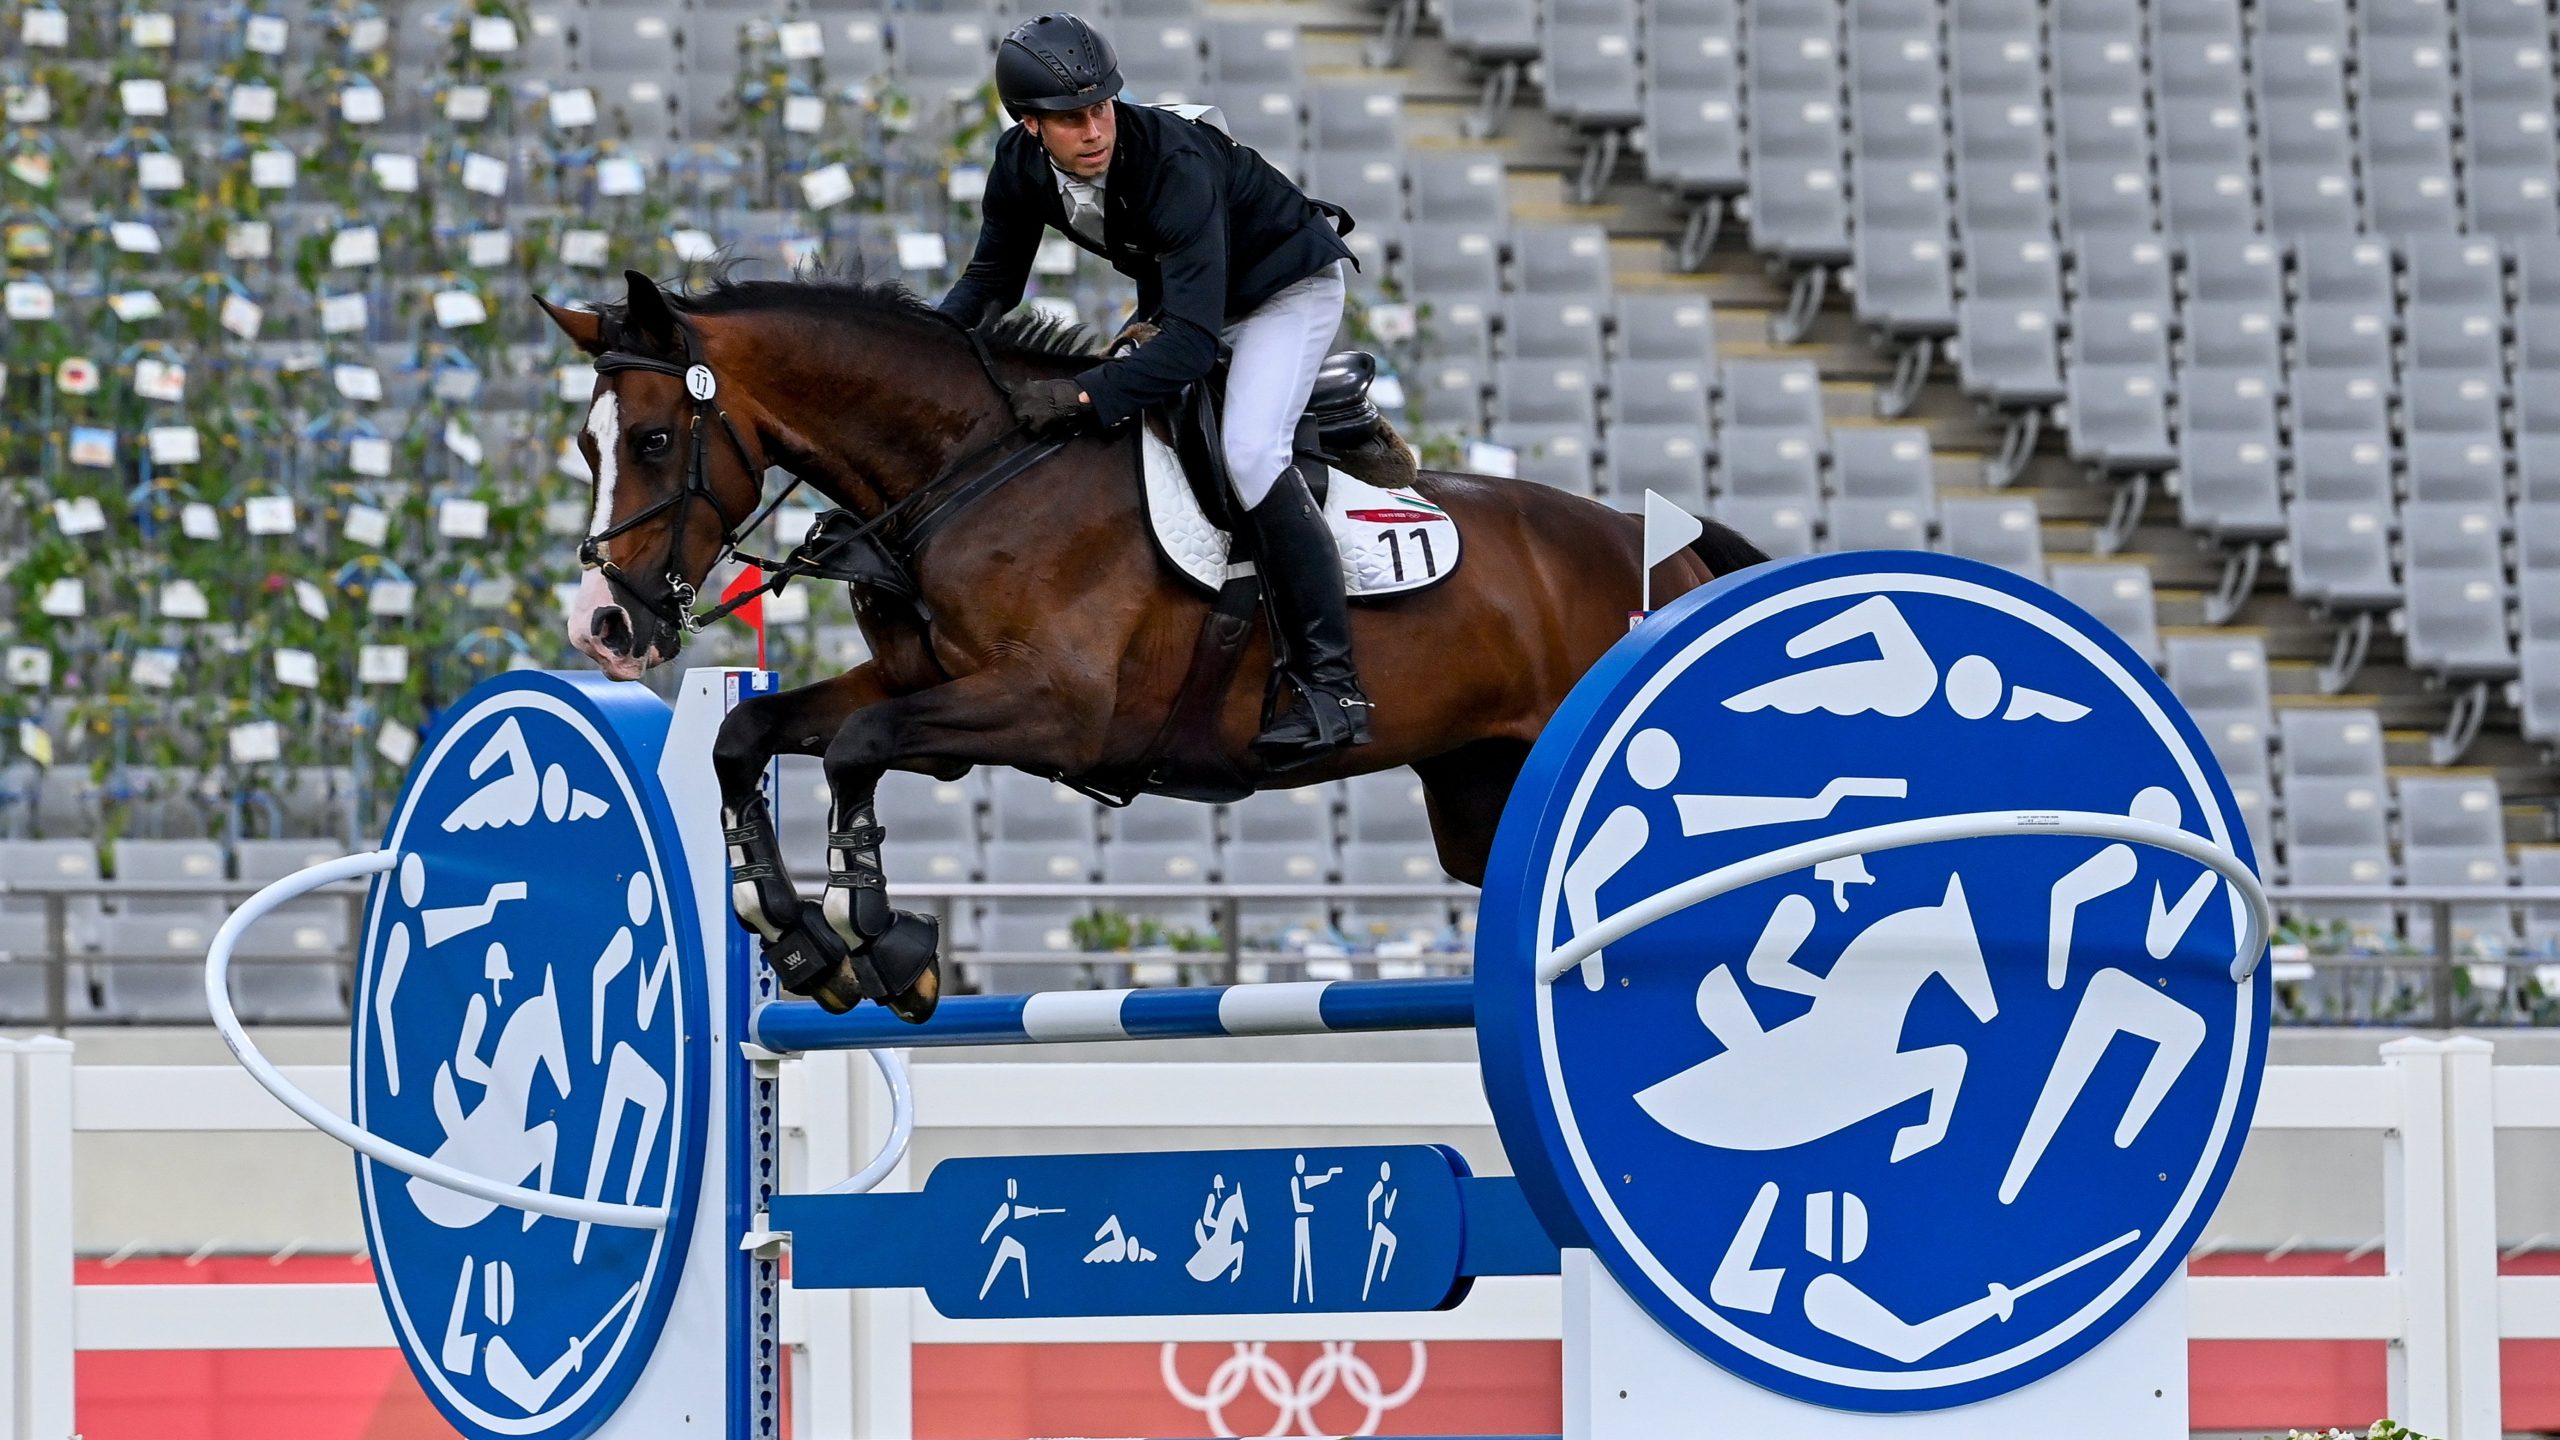 Taking Riding Out of Pentathlon Causes Uproar in Hungary